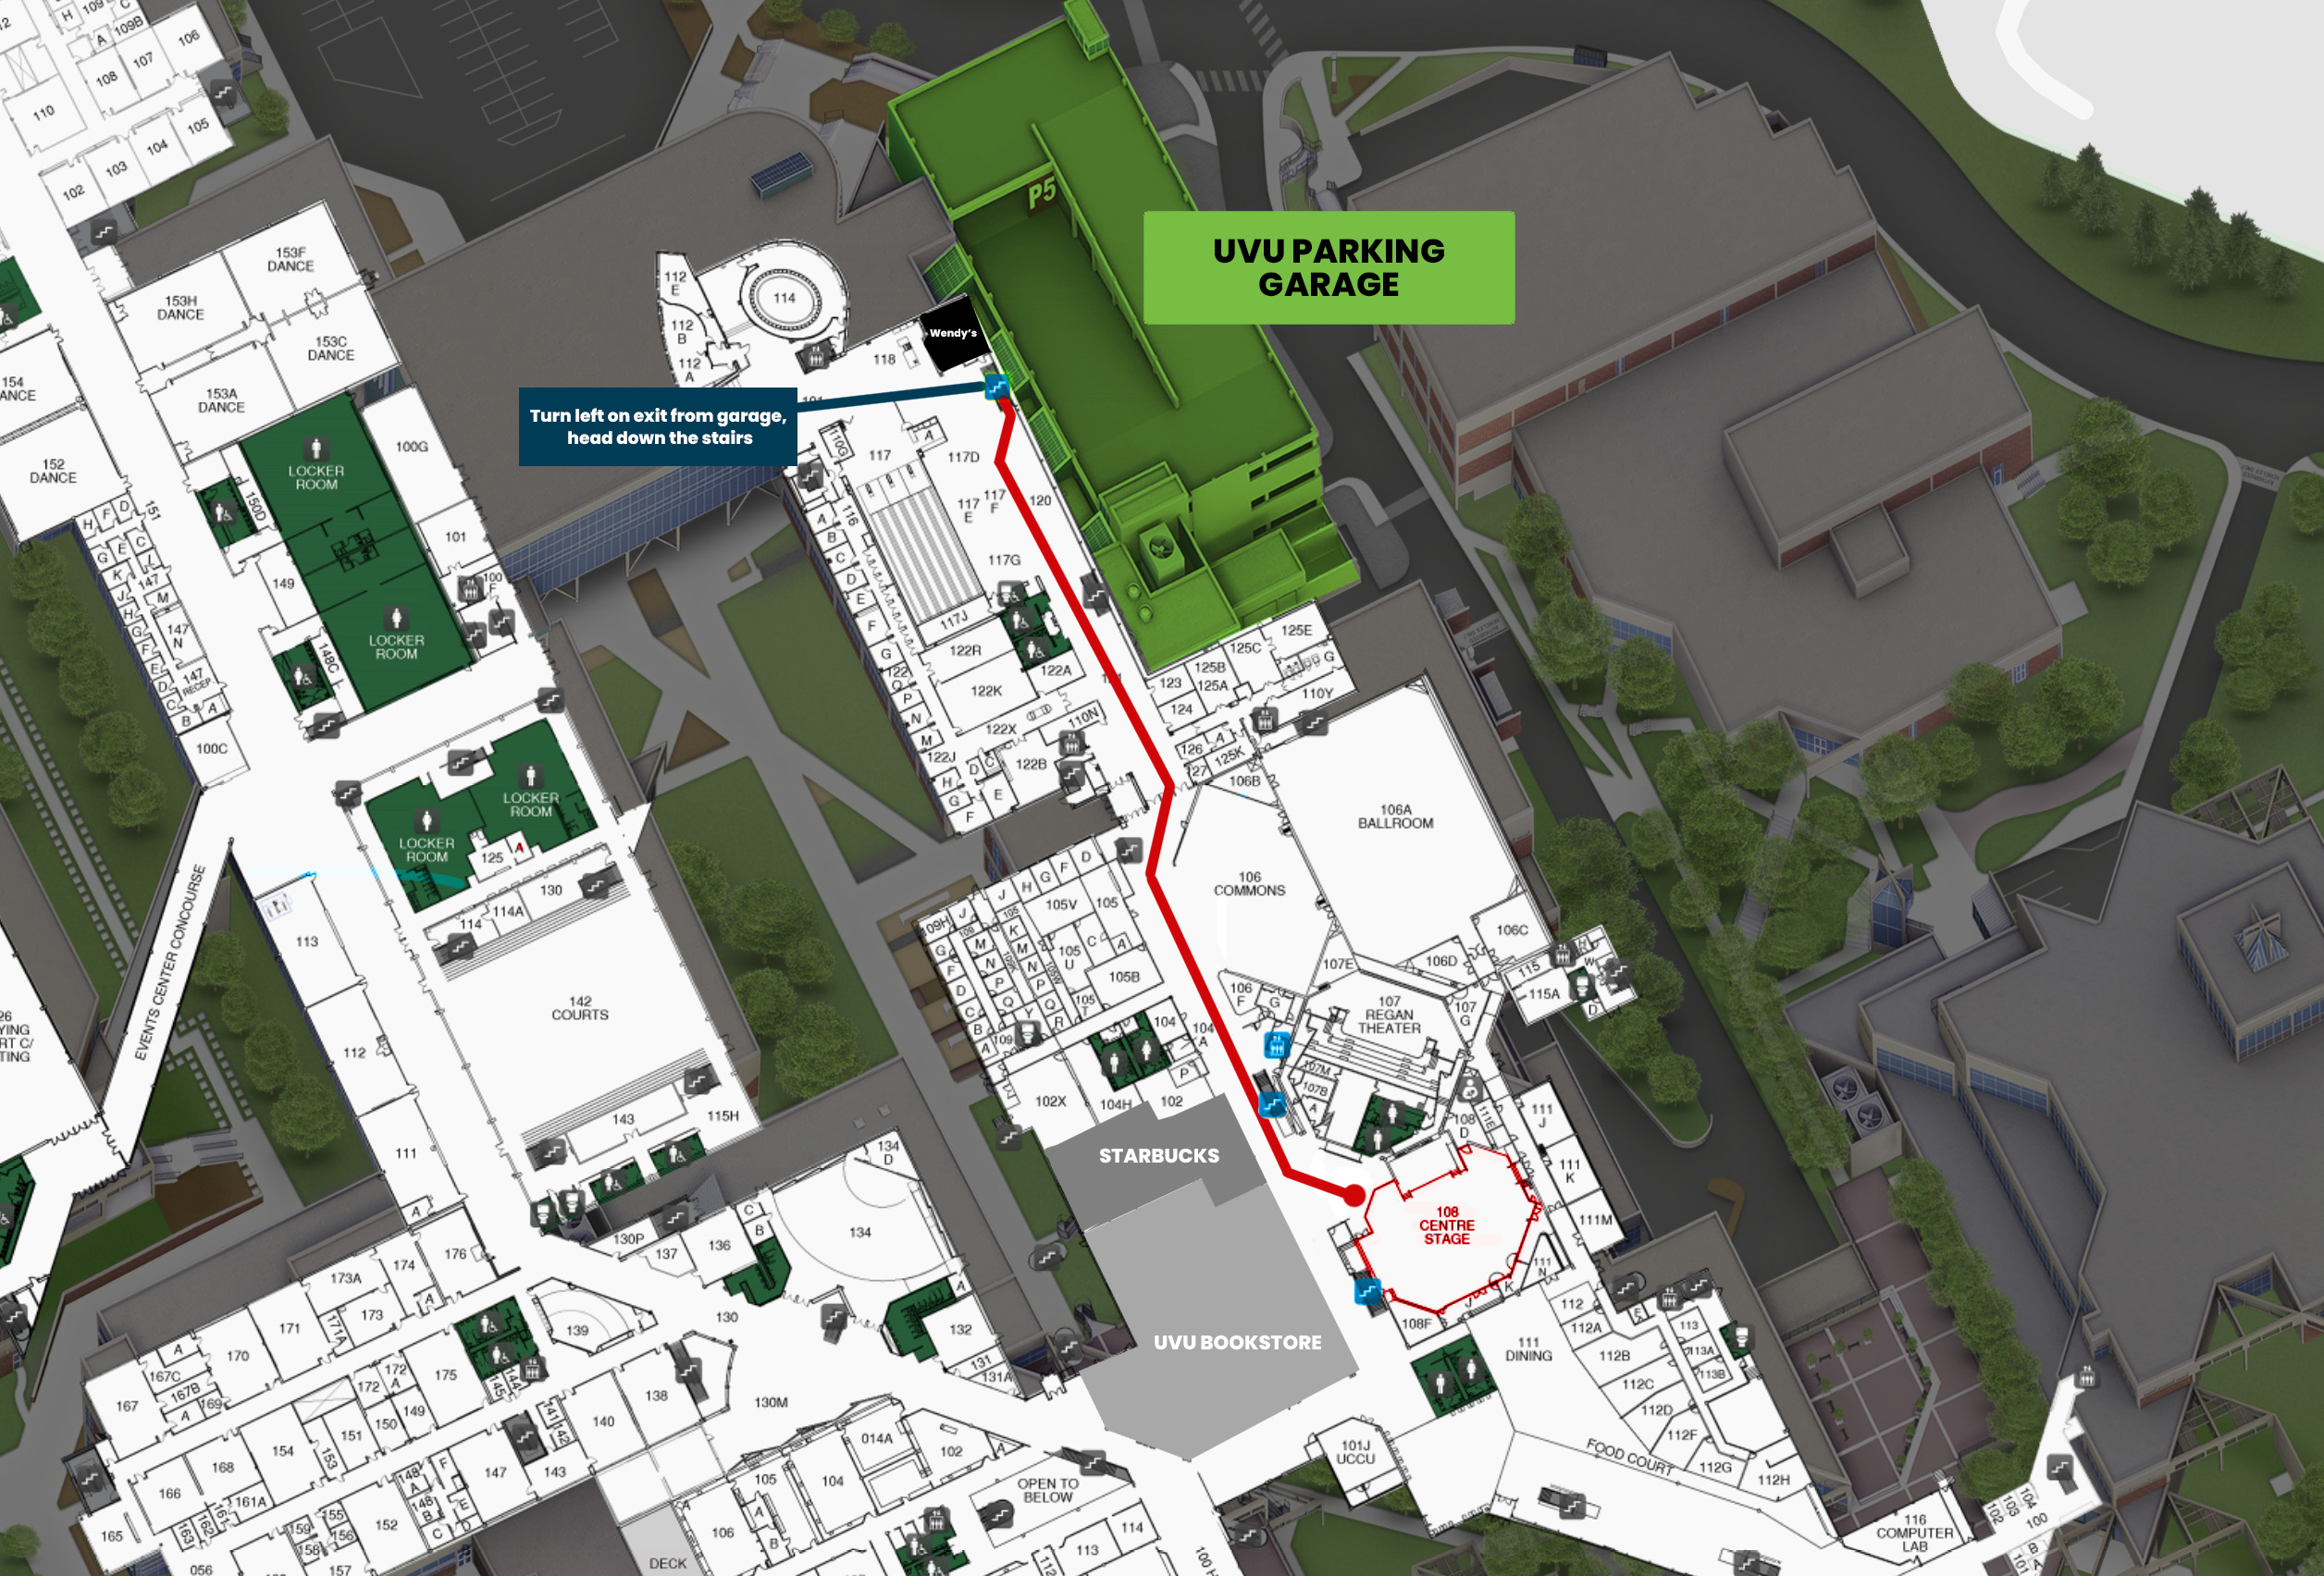 Map showing how to get to the Sorenson Student Center from the Parking Garage